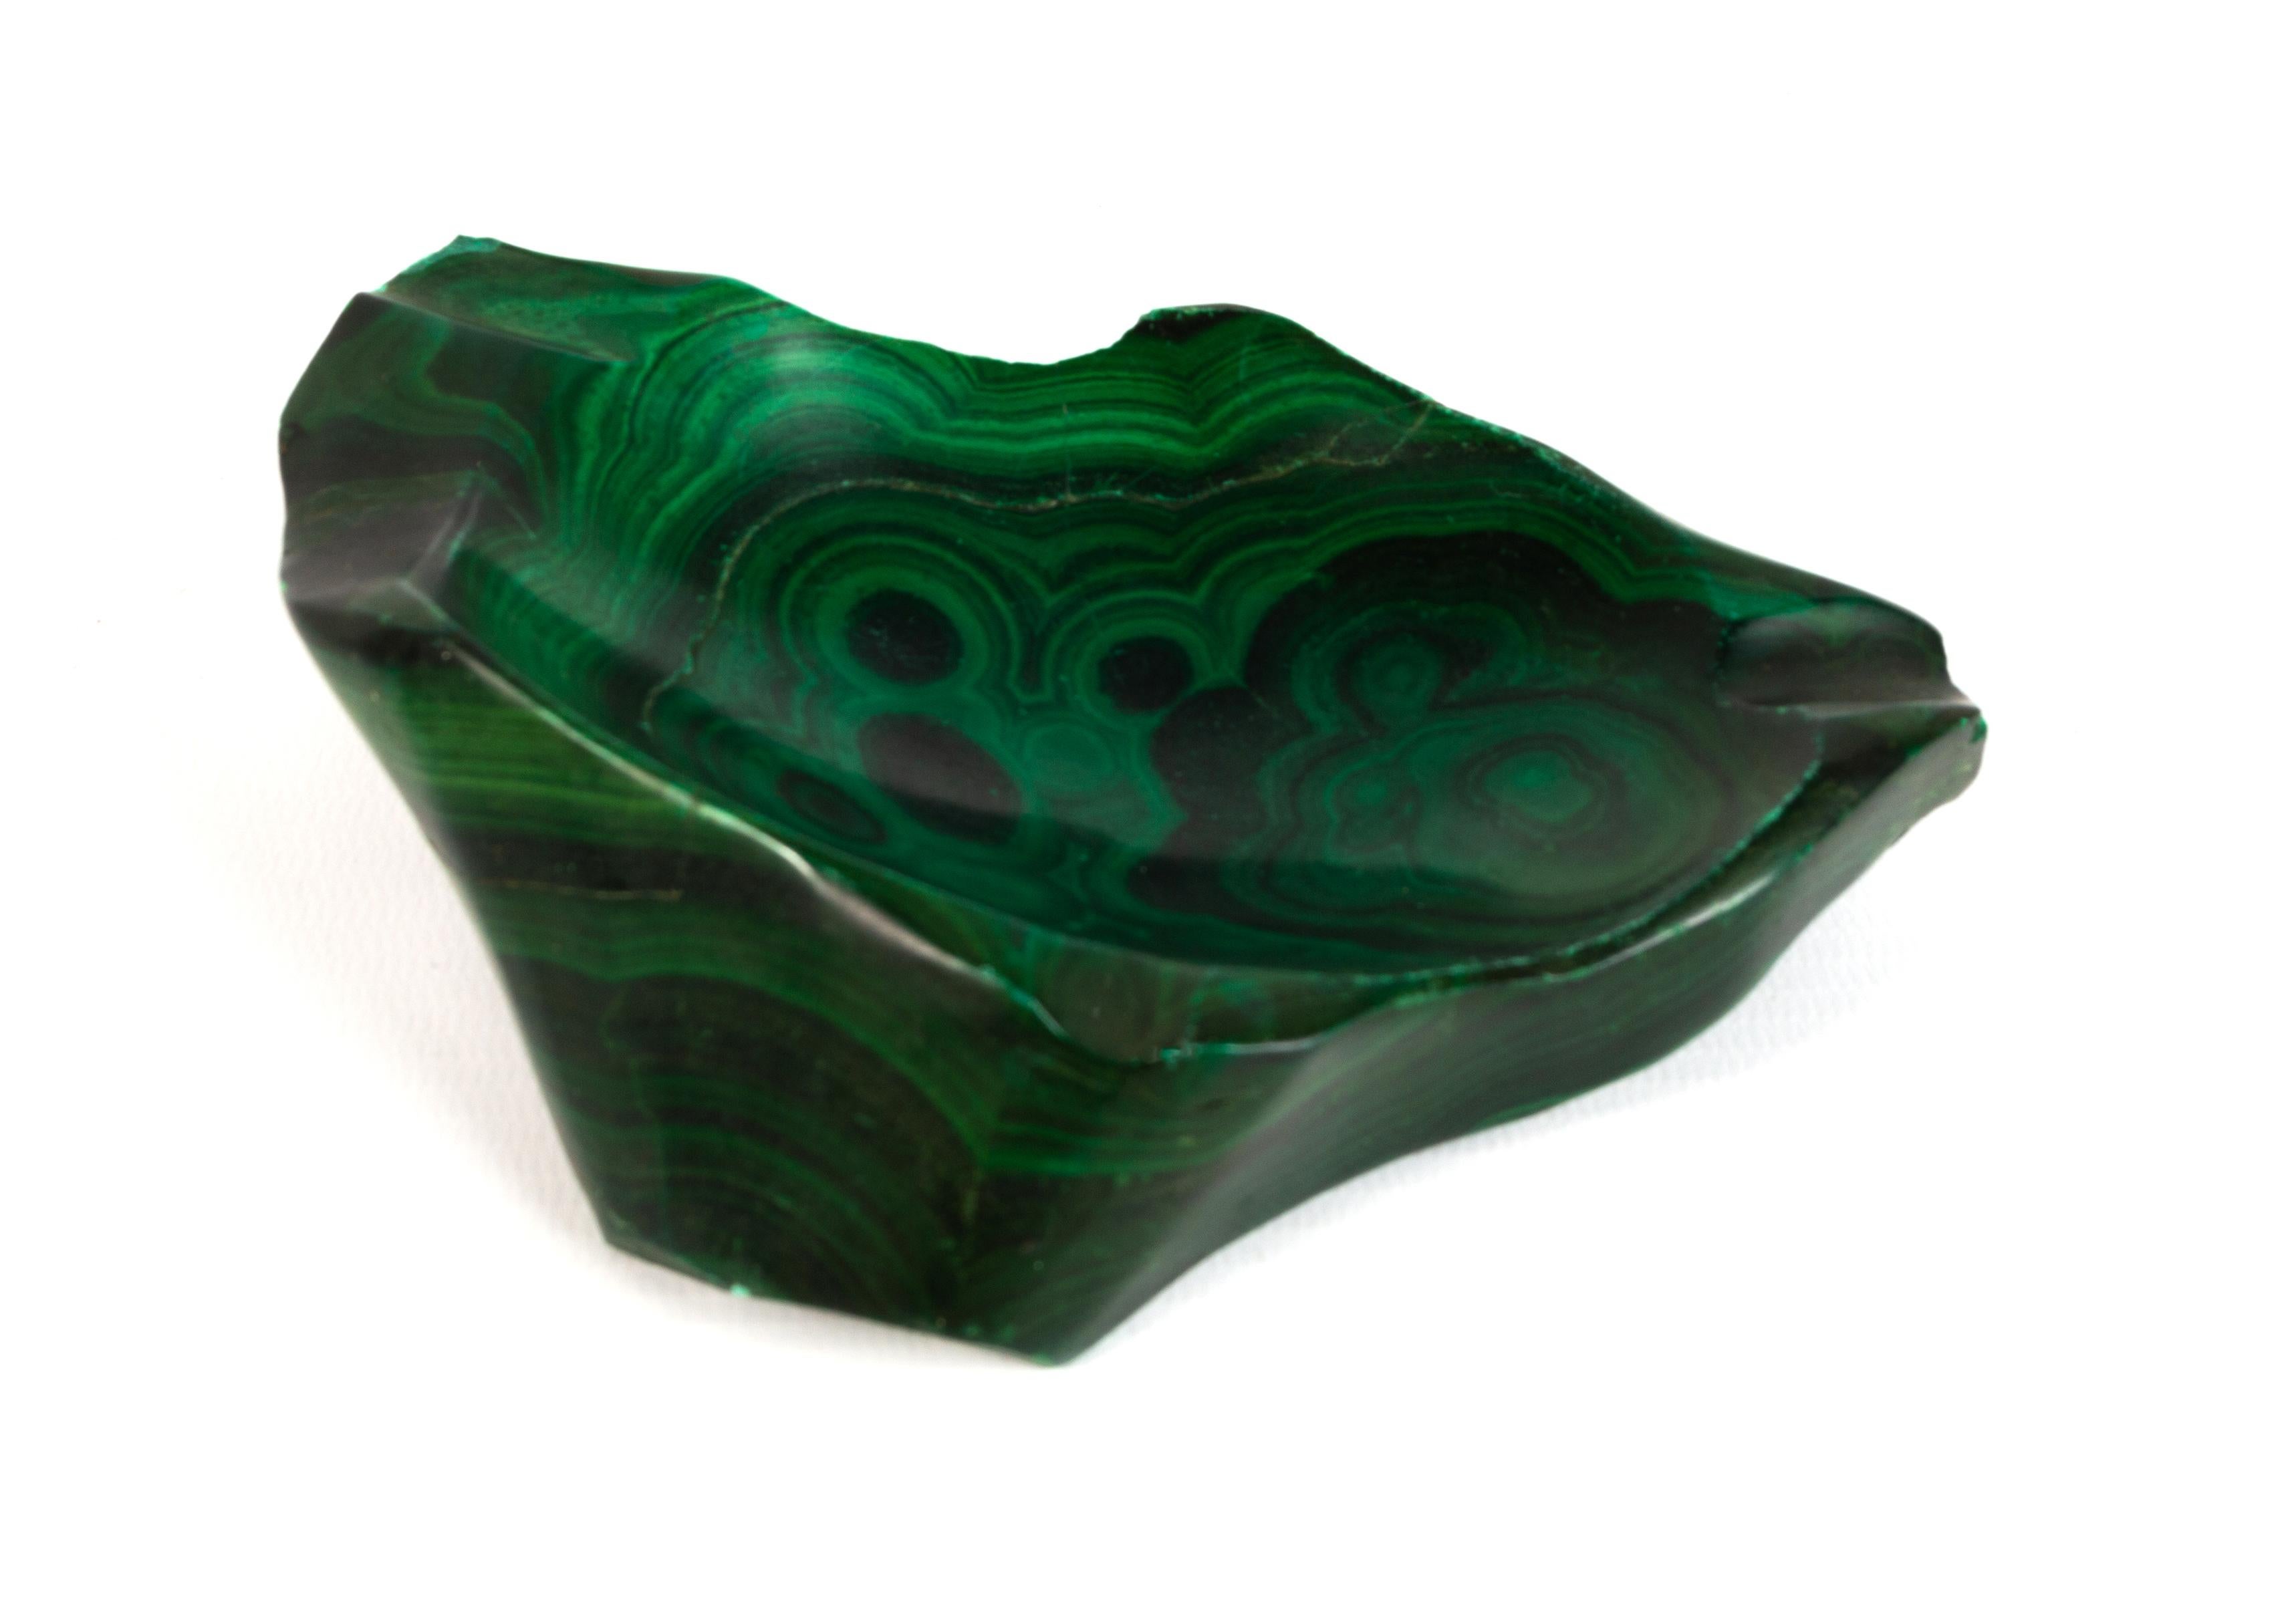 Vintage malachite vide poche trinket dish Italy, C.1960

A substantial piece of all natural malachite mineral stone. Depicting the natural pattern formation of this stunning rock. 

In excellent condition commensurate of age.